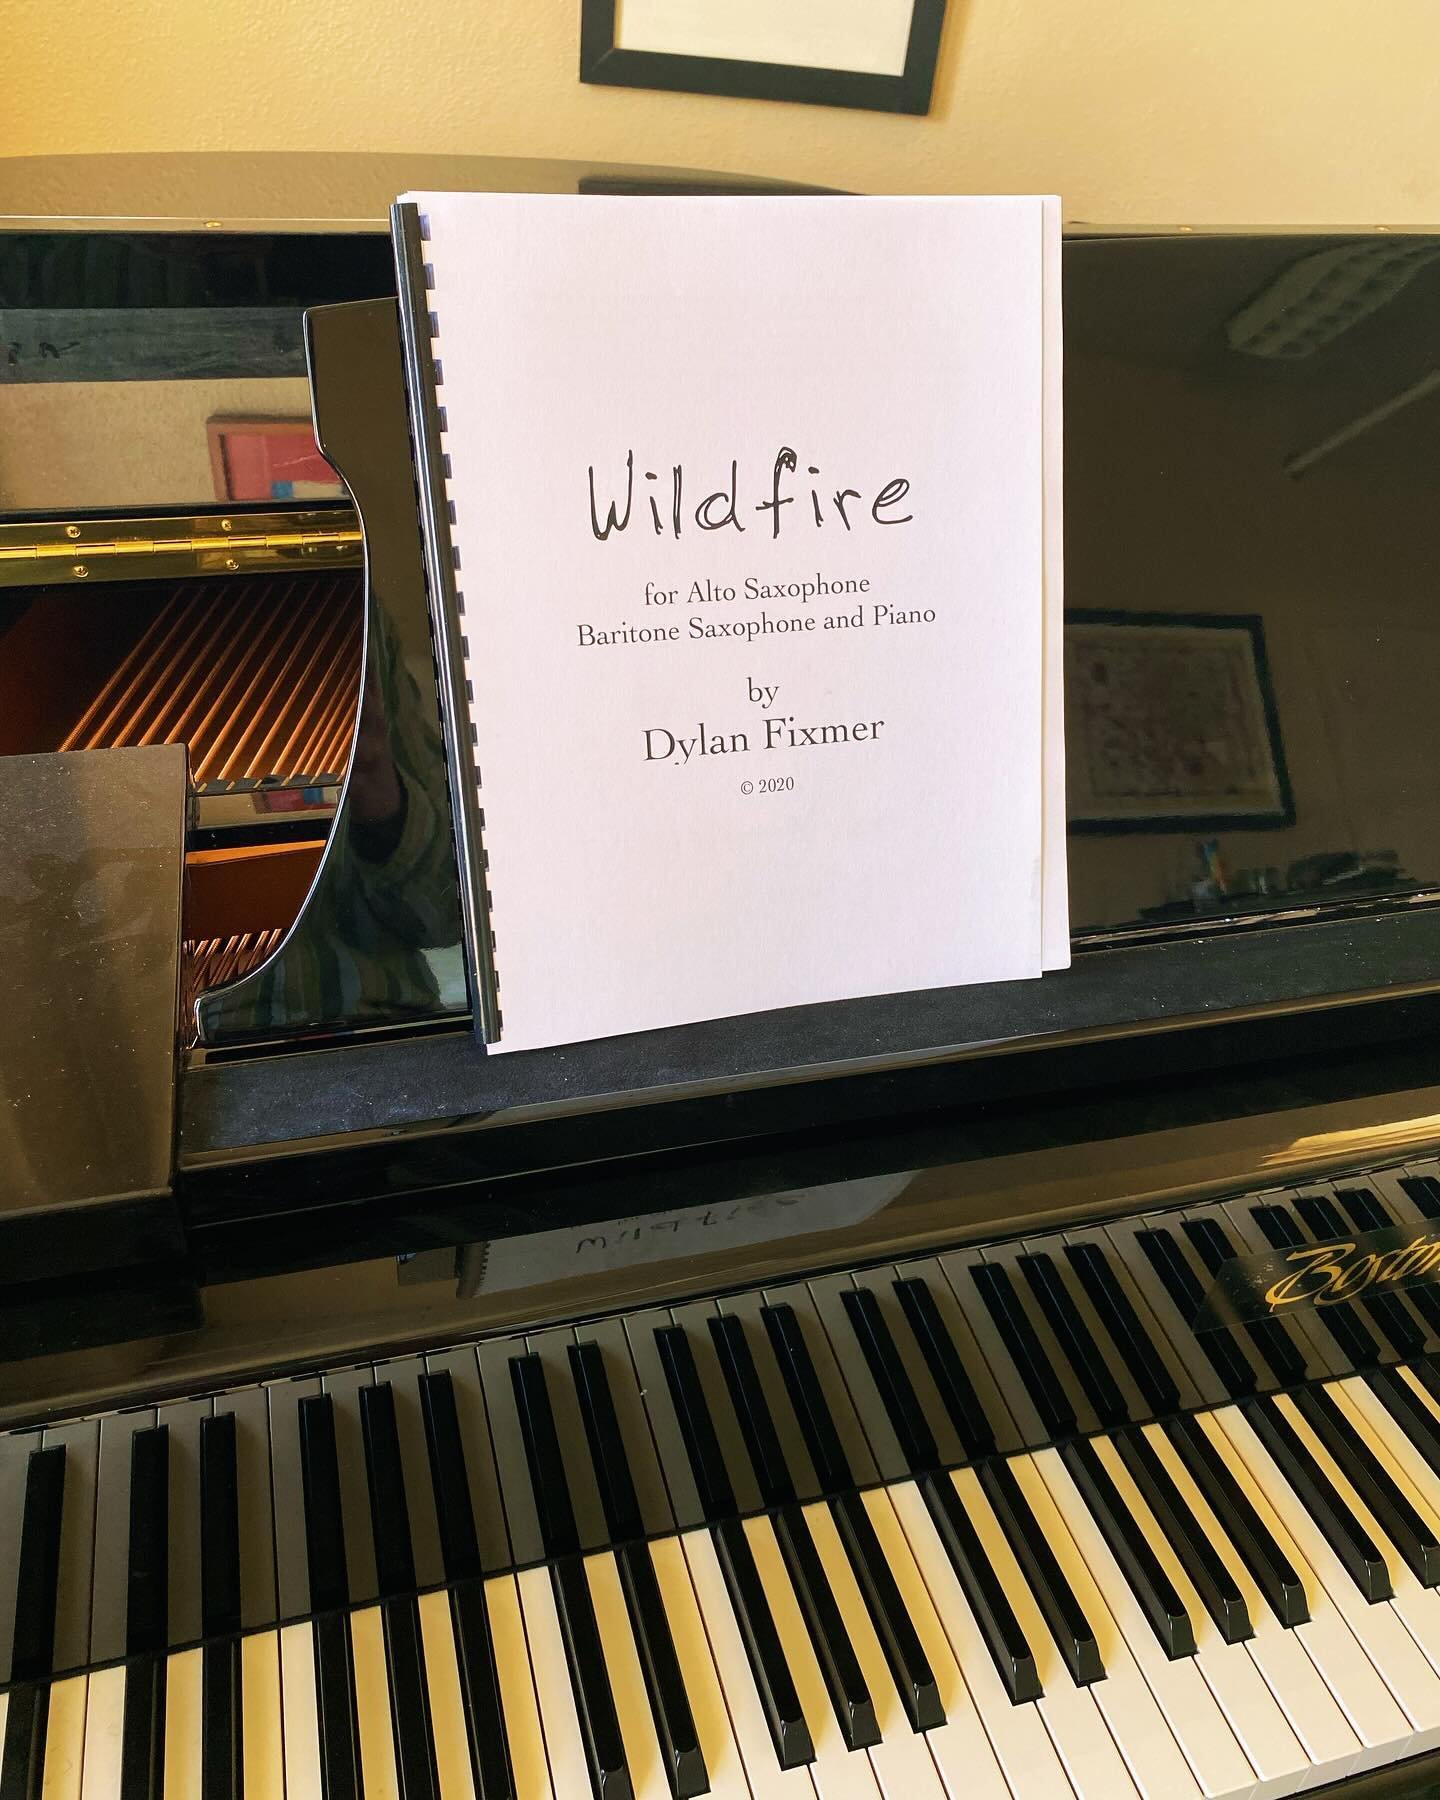 Hot of the presses! 🔥🎶 Wildfire for alto sax, bari sax and piano! Available at my online store- https://www.dylanfixmermusic.com/store/p/wildfire-piano-trio-for-alto-sax-bari-sax-and-piano-2020